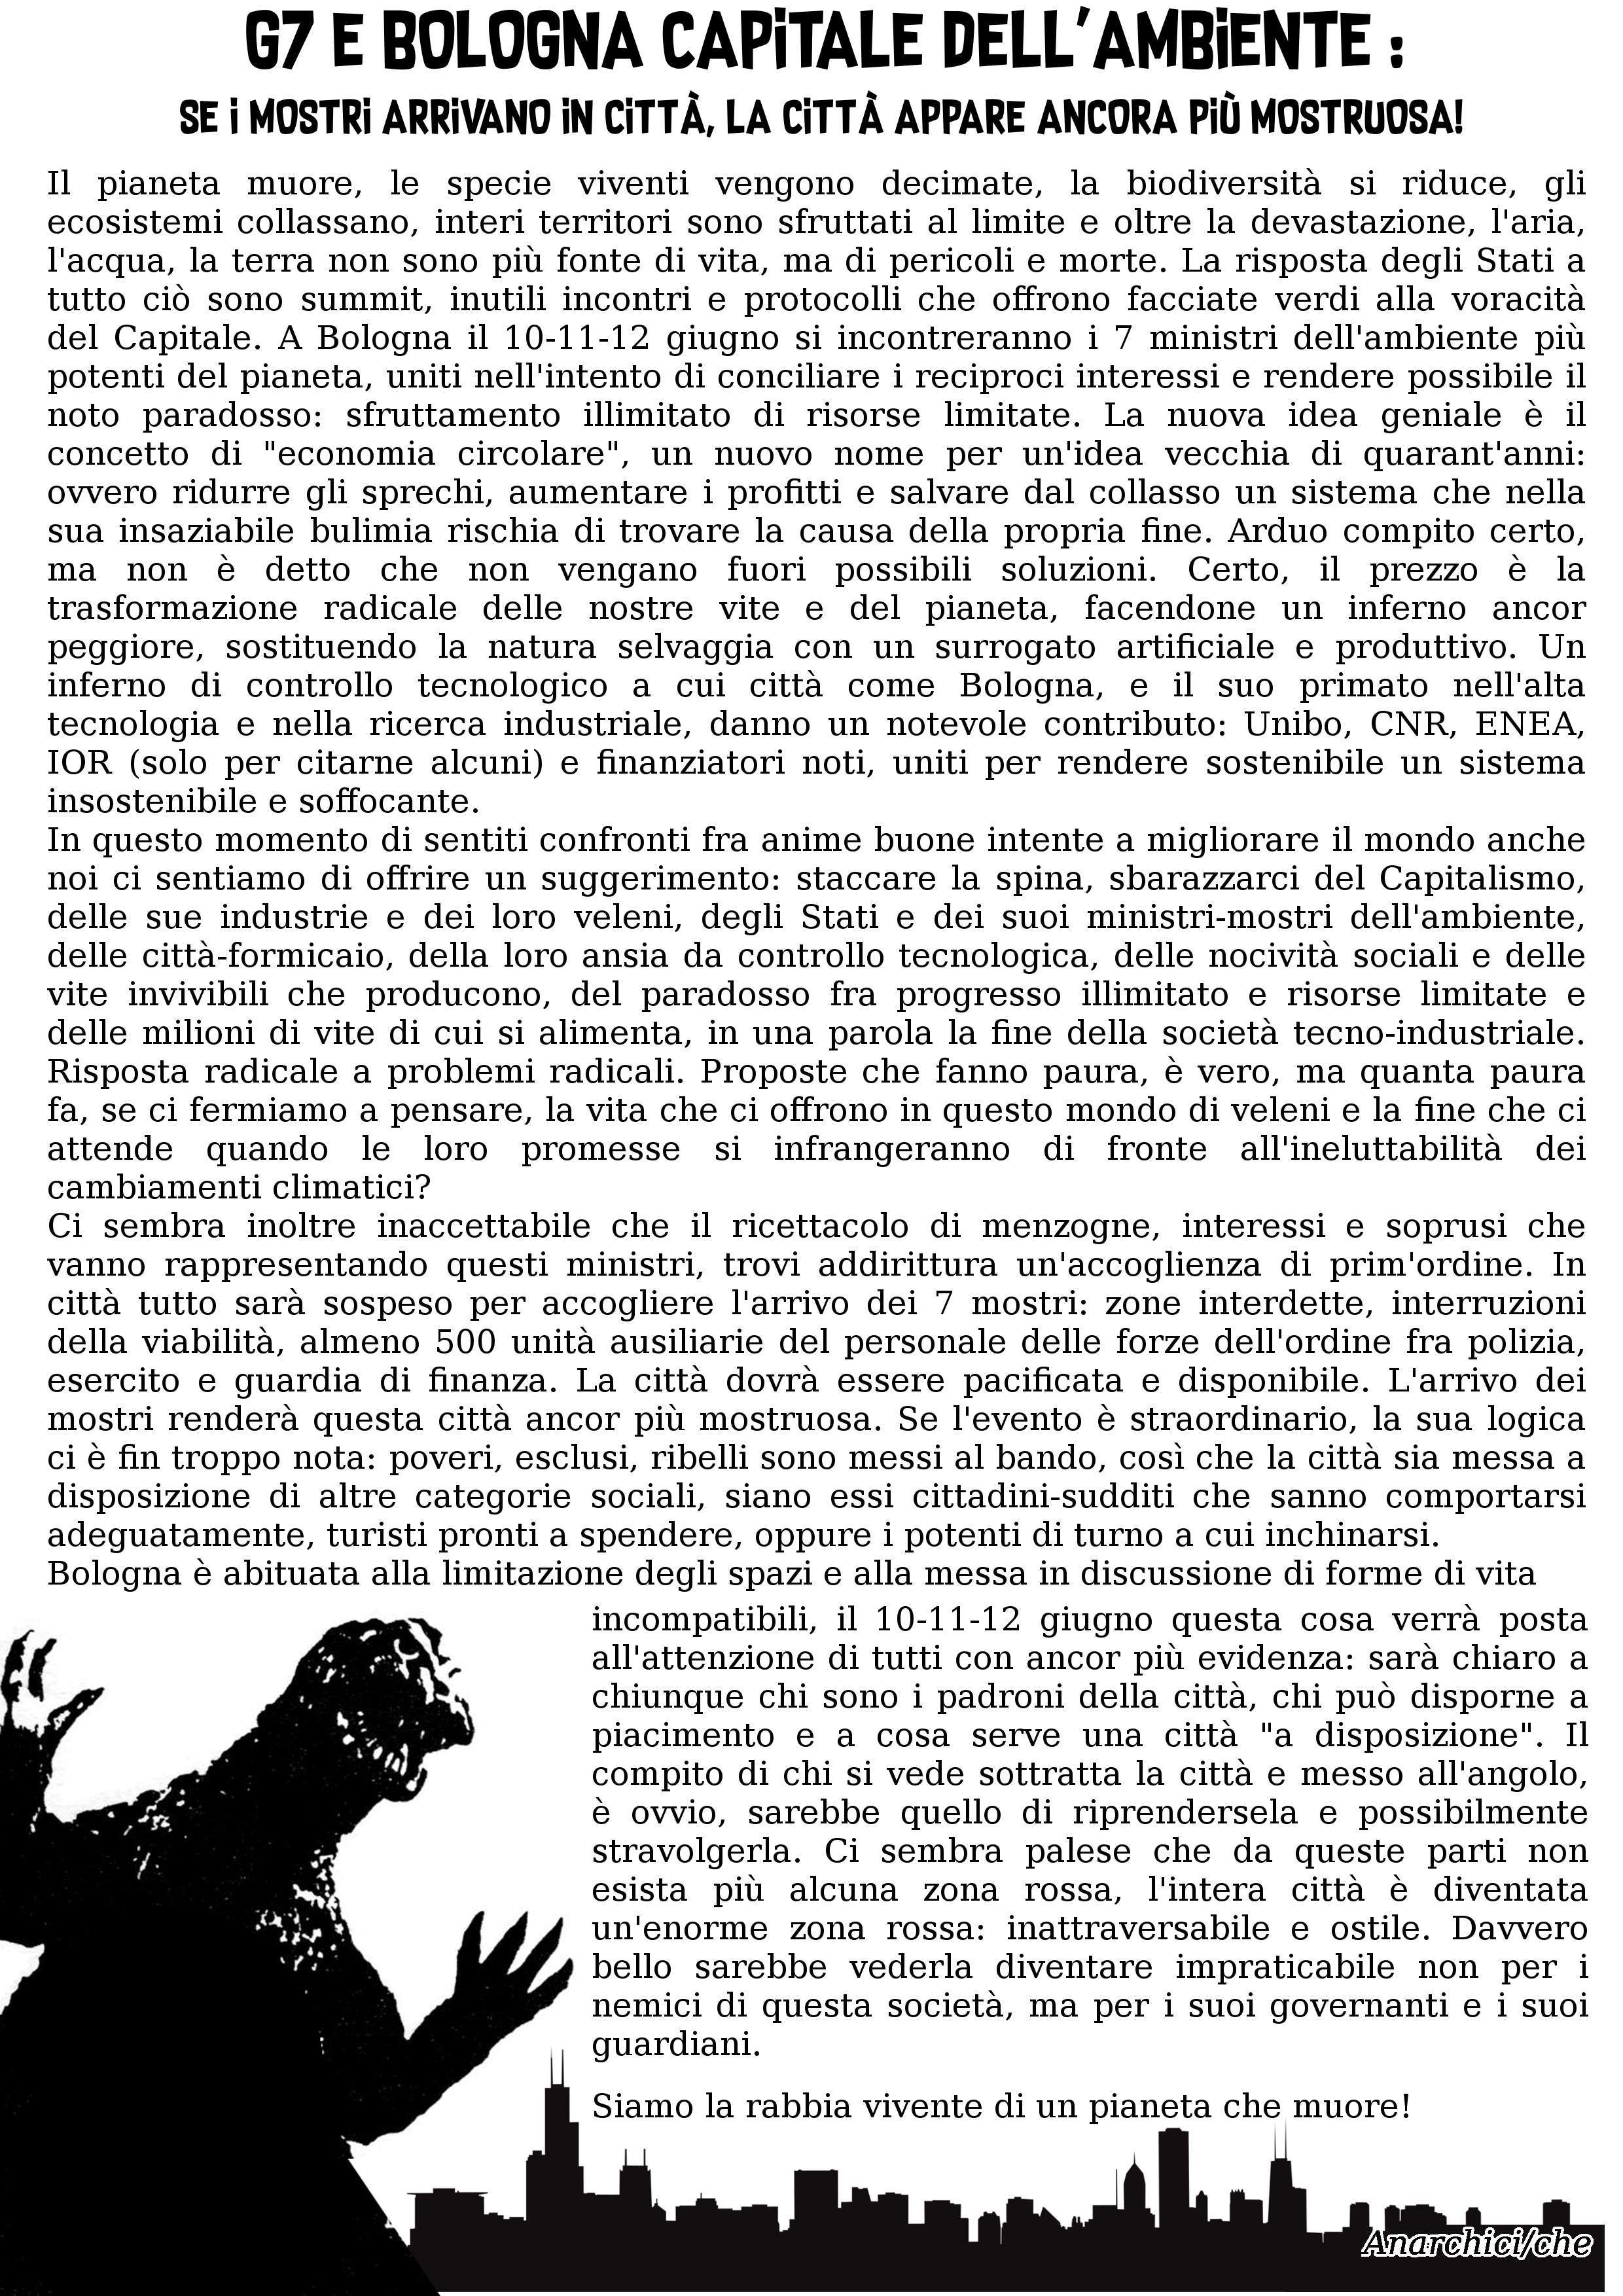 Italy: Bologna capital of the environment: the monsters are coming to the city, the city looks even more monstrous